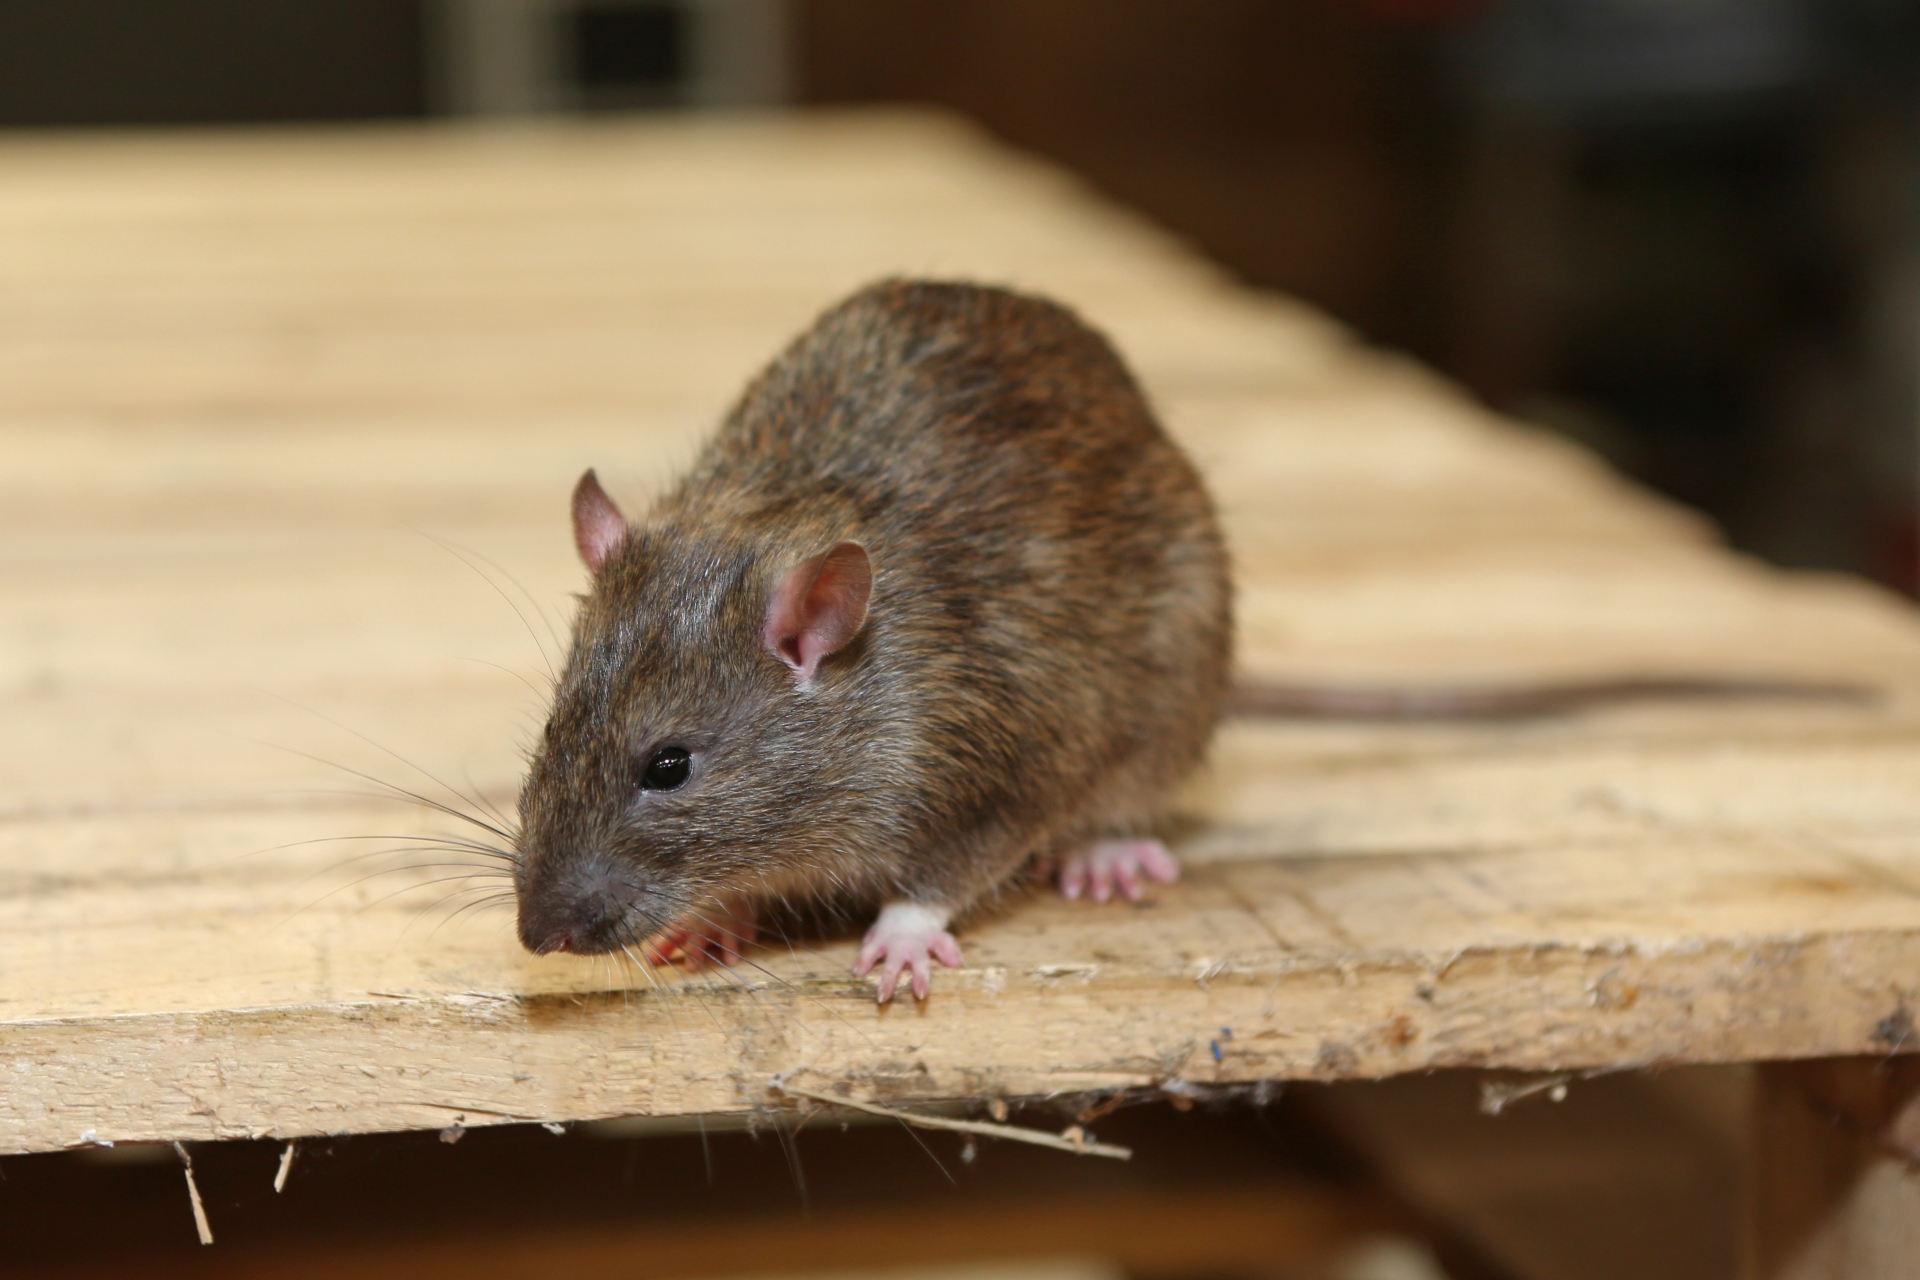 Rat extermination, Pest Control in Earlsfield, SW18. Call Now 020 8166 9746